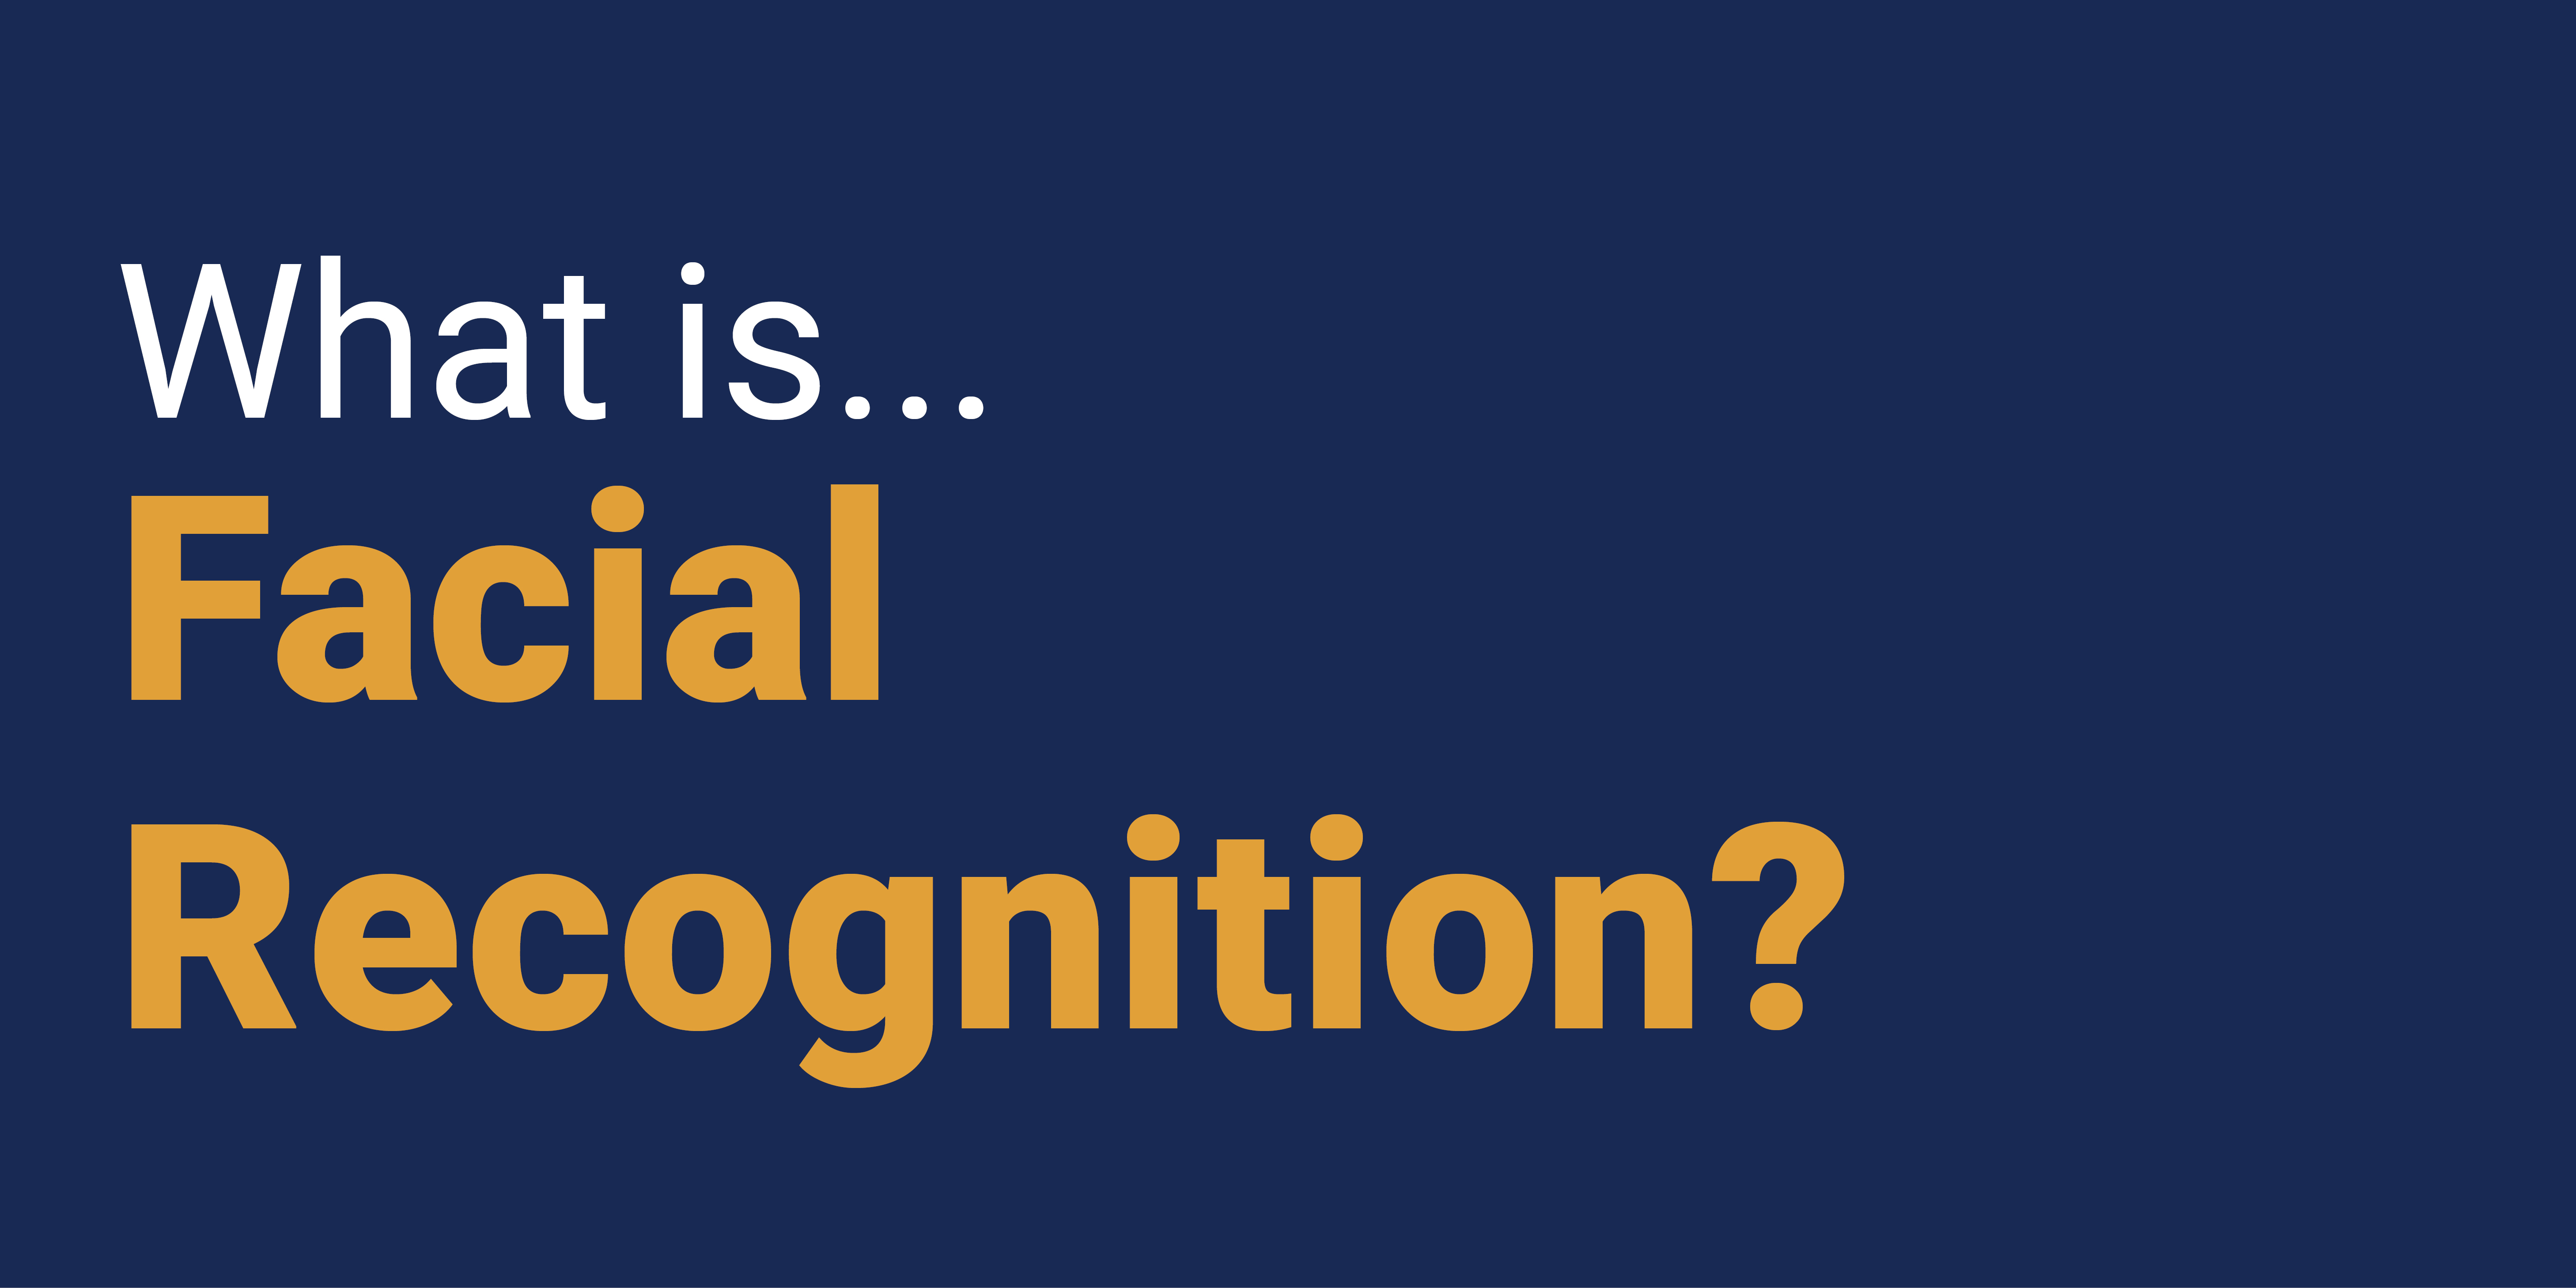 What is Facial Recognition?